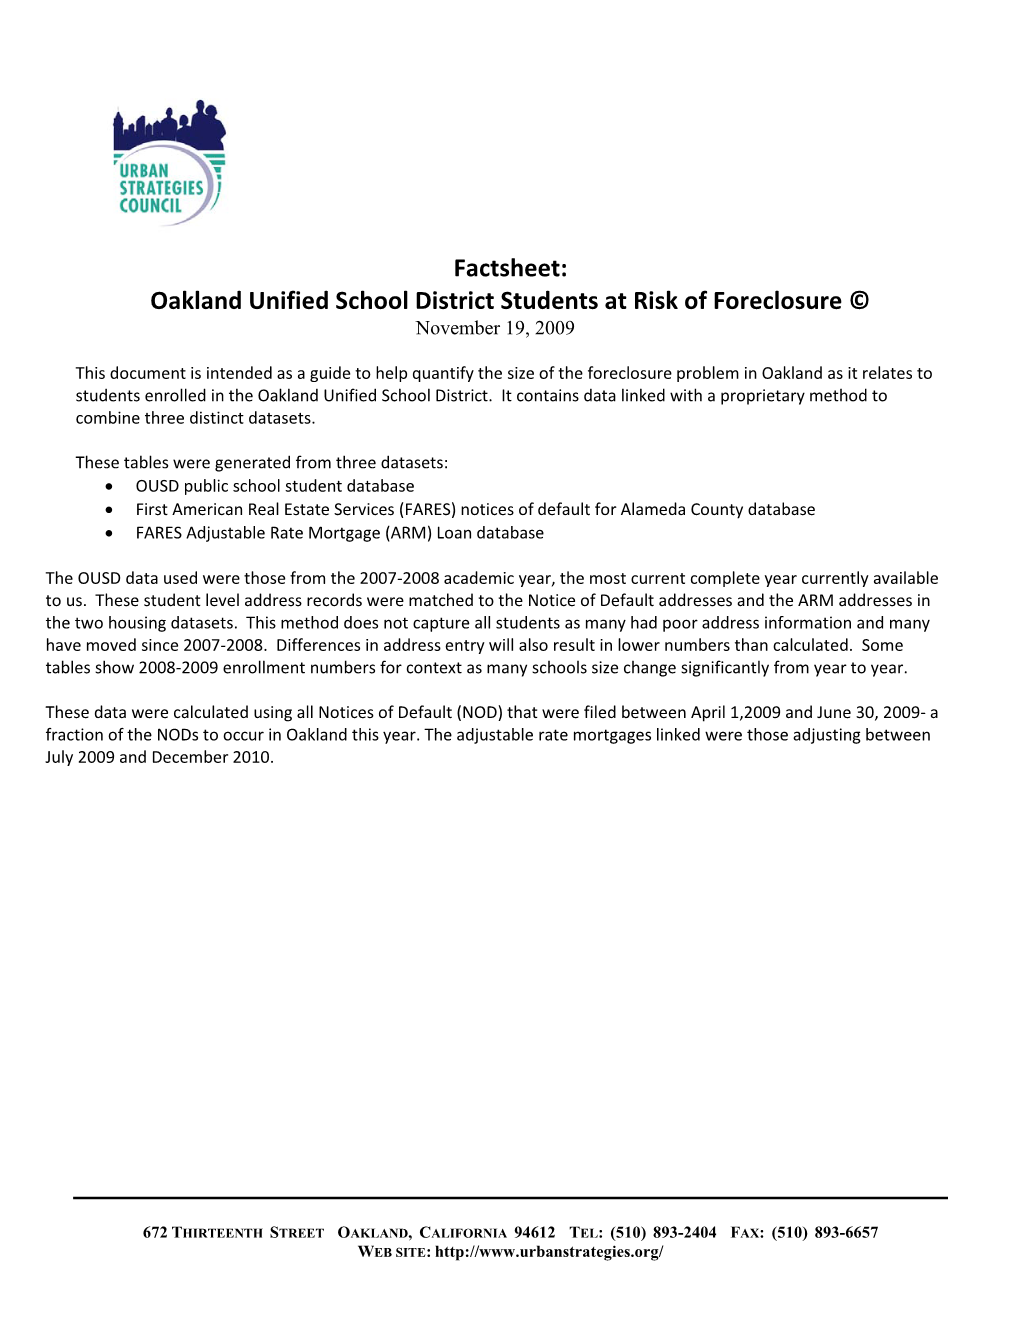 Factsheet: Oakland Unified School District Students at Risk of Foreclosure © November 19, 2009